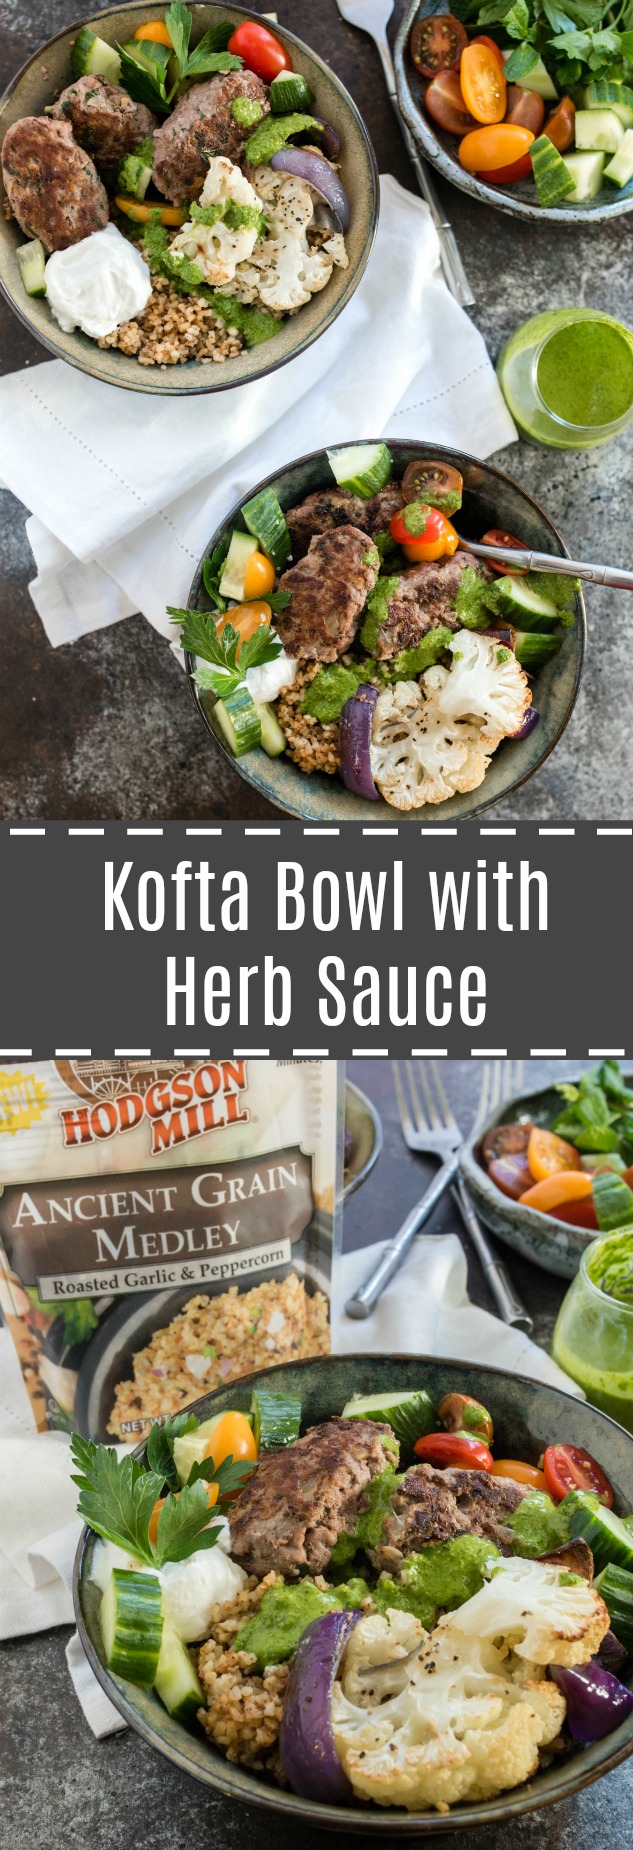 #AD This Beef and Grain Kofta bowl takes Middle Eastern inspired meatballs and pairs them with a hearty flavorful grain and some veggies for a nutrition packed meal! #NewYearNewGrain18